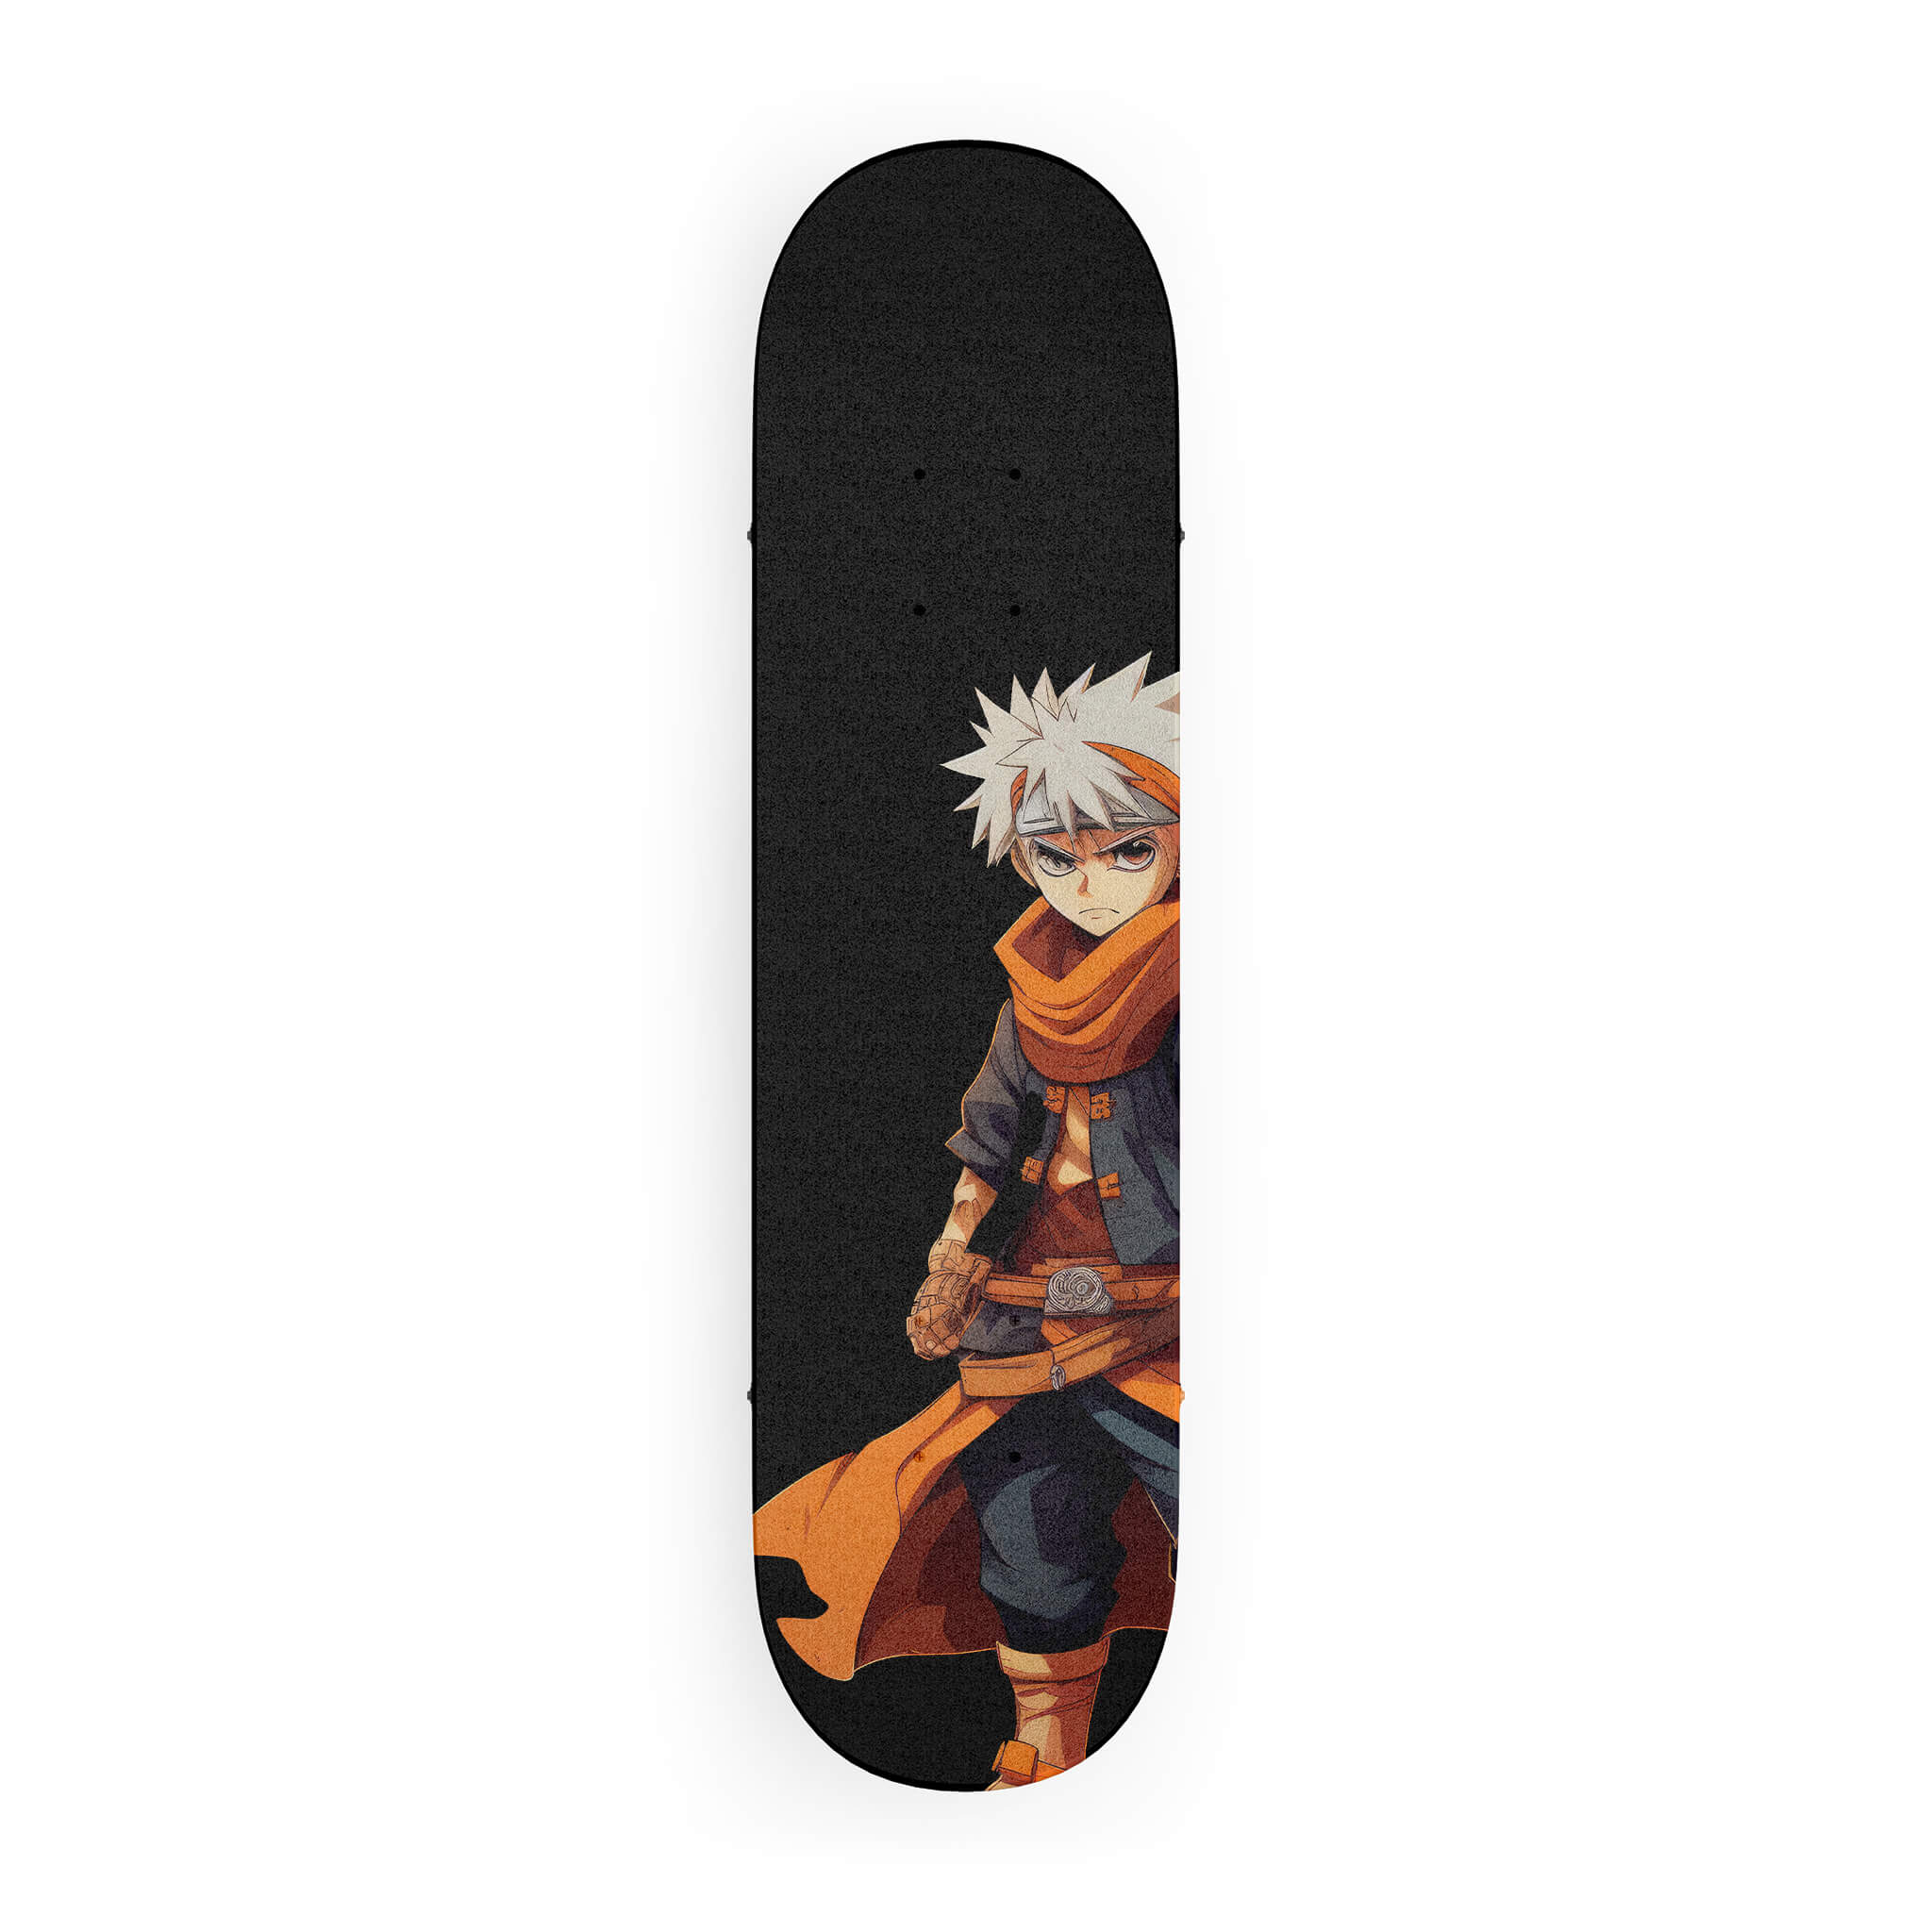 I want an anime grip tape for my first board, but I can't decide which one  of these I want. Which one do you think is the coolest? : r/NewSkaters